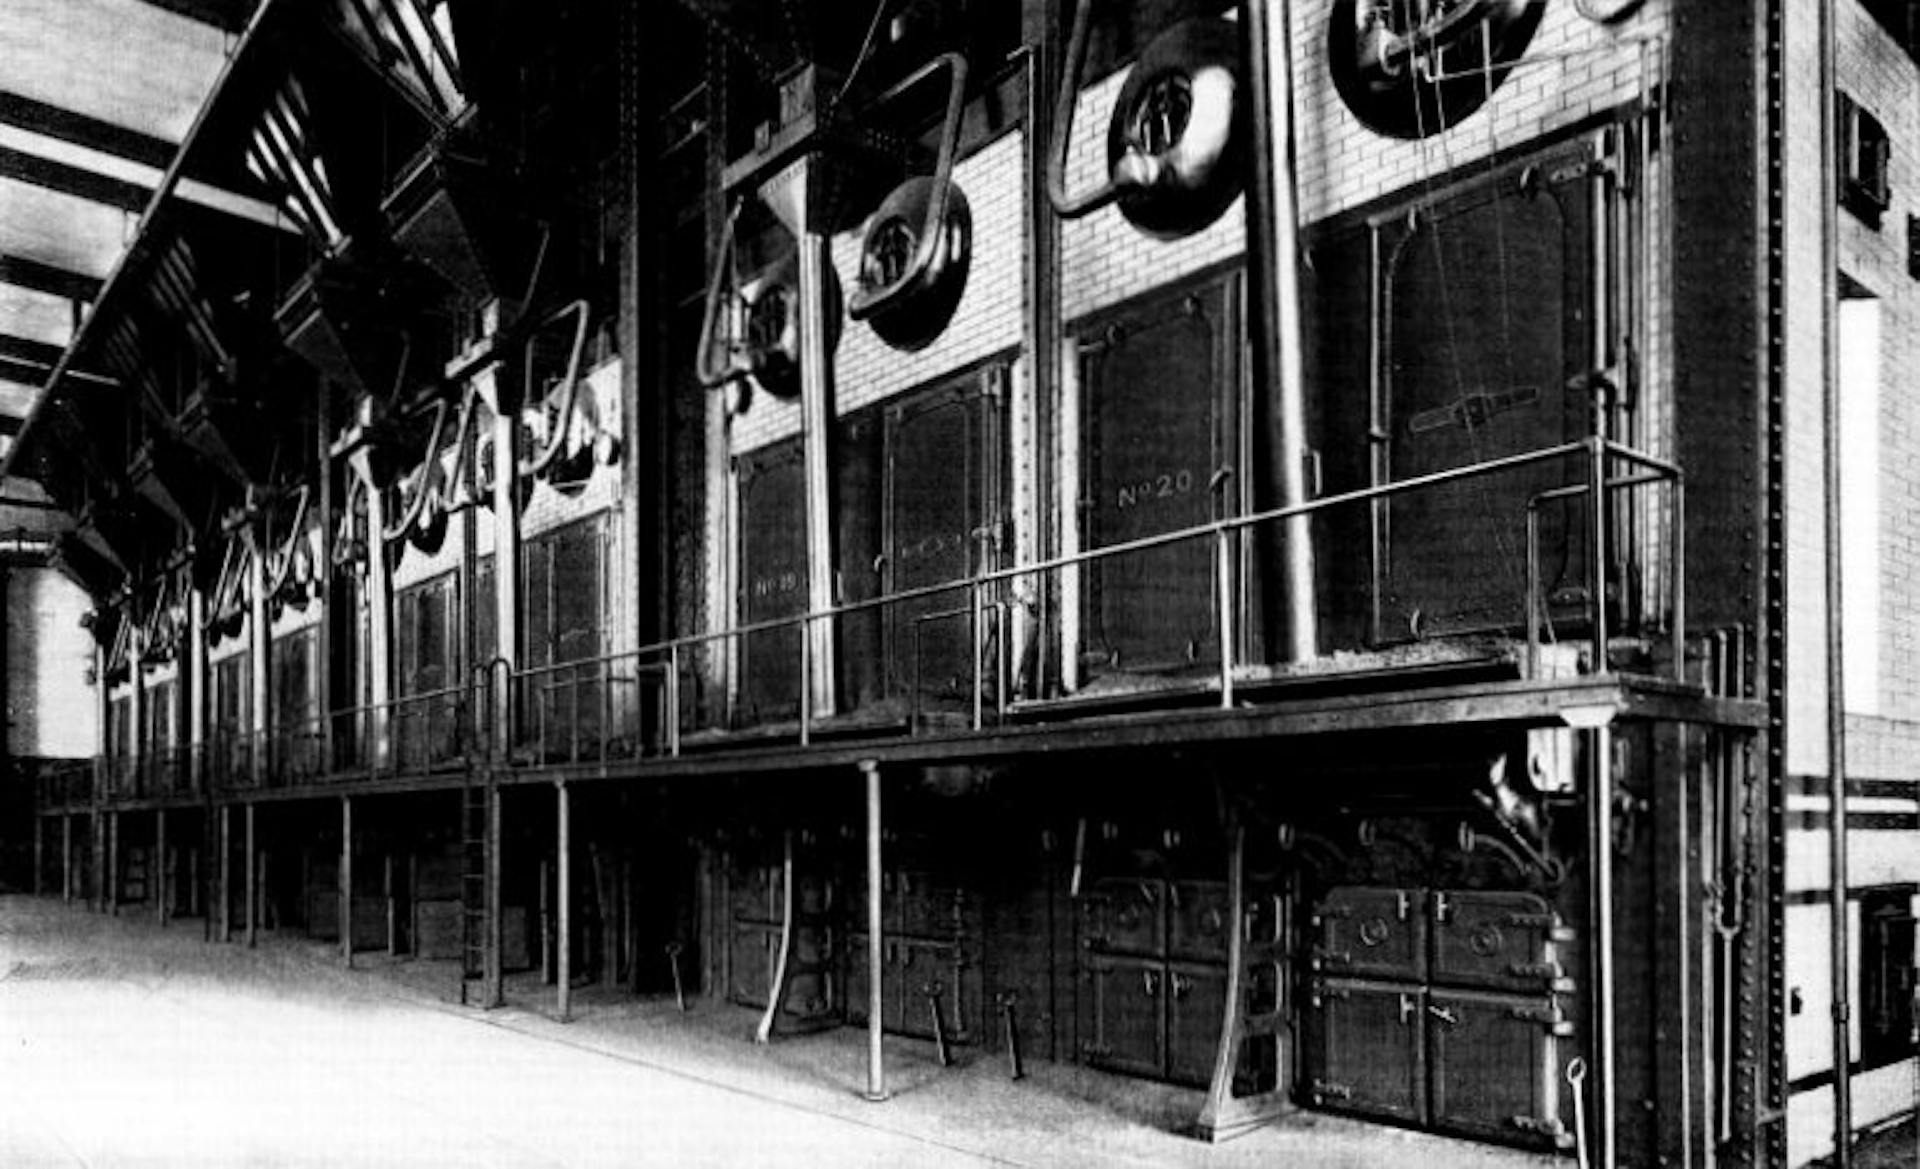 Portion of 29,000 Horse-power Installation of Babcock & Wilcox Boilers in the L Street Station of the Edison Electric Illuminating Co. of Boston, Mass. This Company Operates in its Various Stations a Total of 39,000 Horse Power of Babcock & Wilcox Boilers